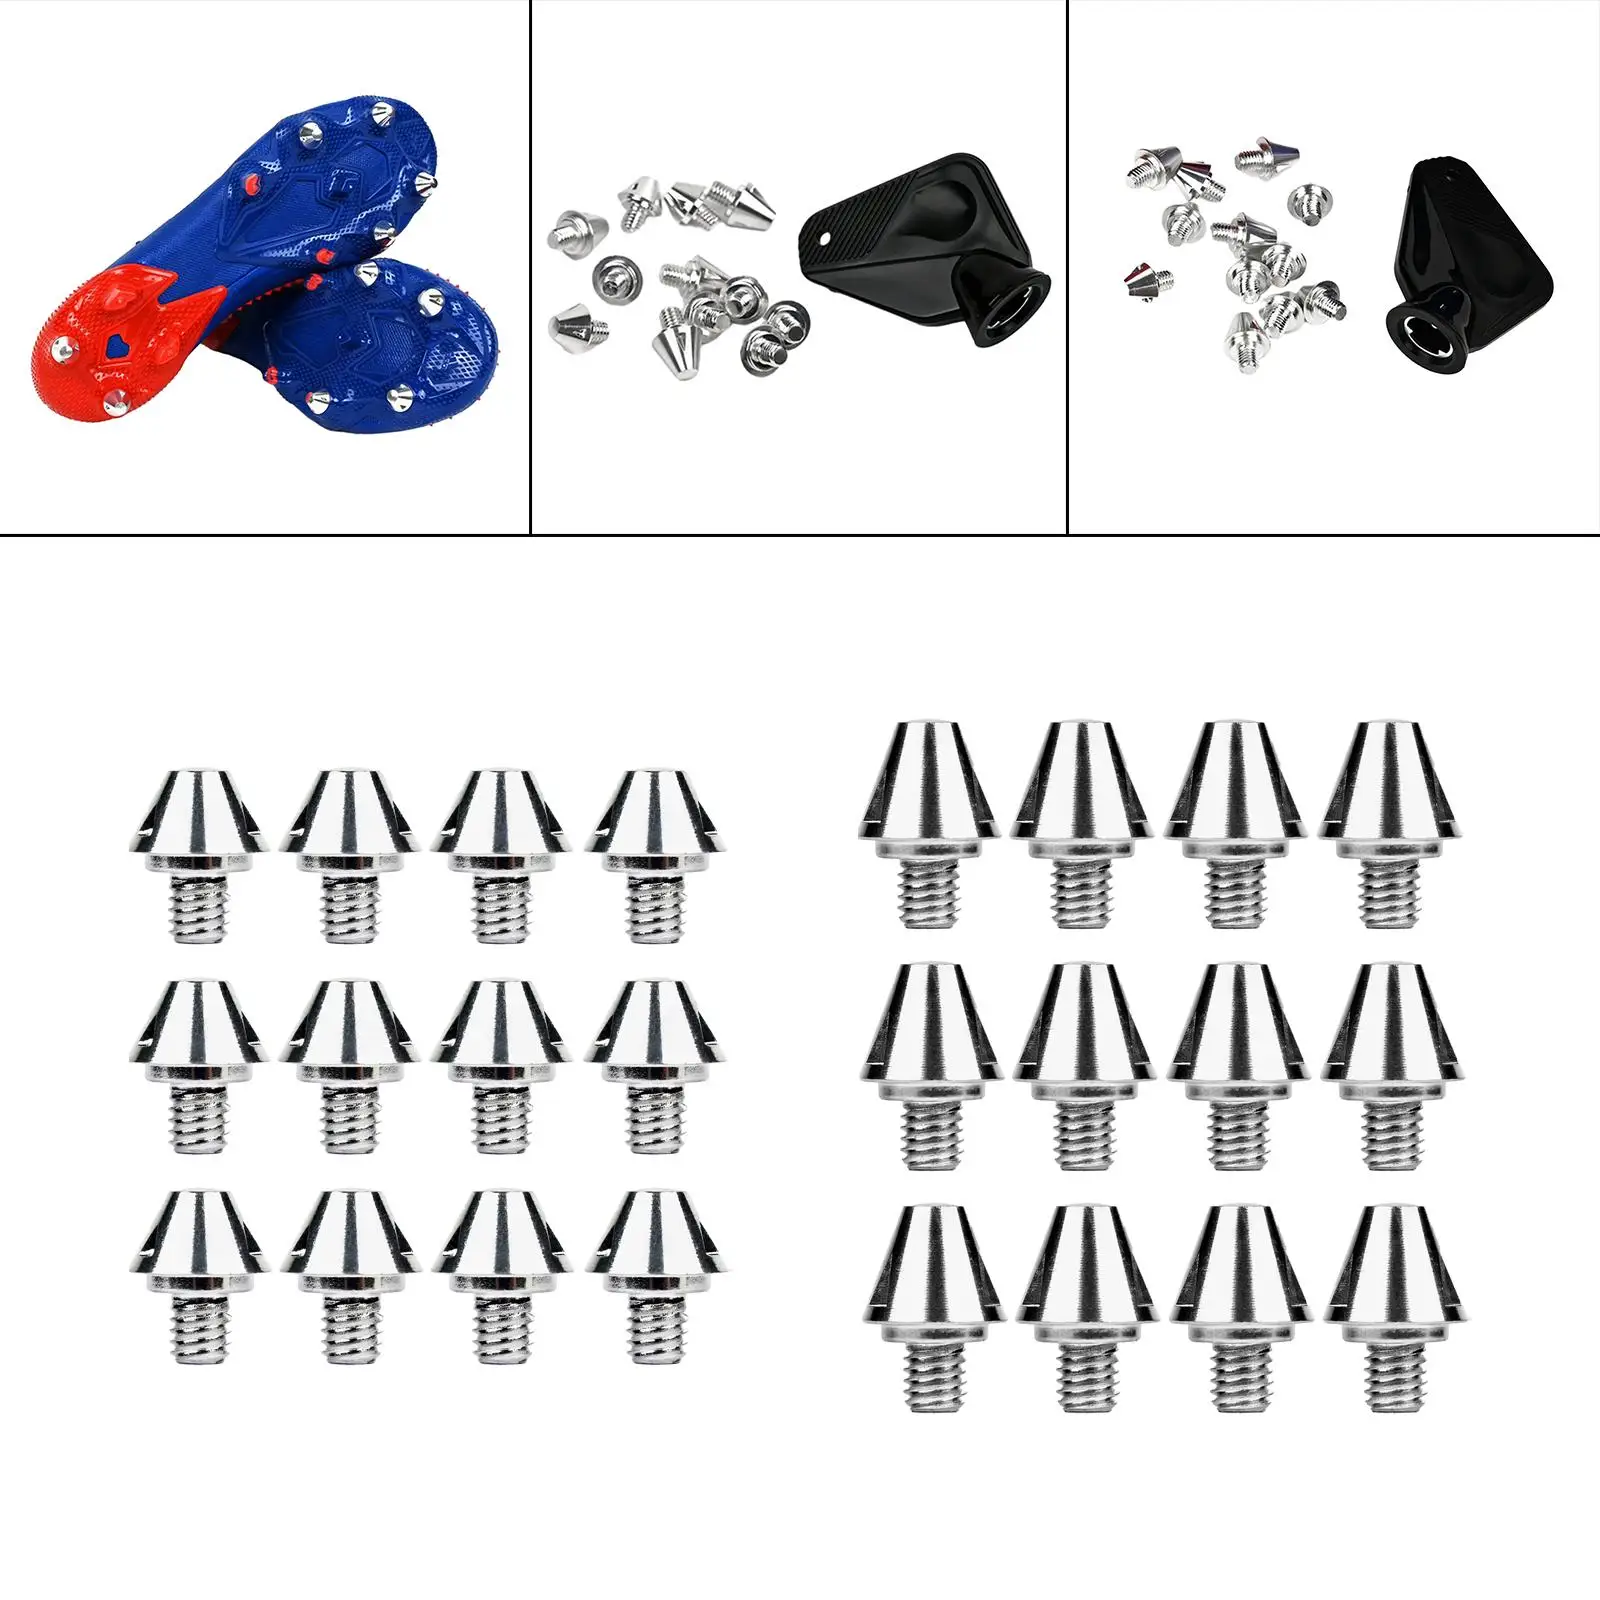 12Pcs Soccer Boot Cleats Professional Thread Screw 6mm Dia Turf Rugby Shoes Studs for Indoor Outdoor Sports Athletic Sneakers